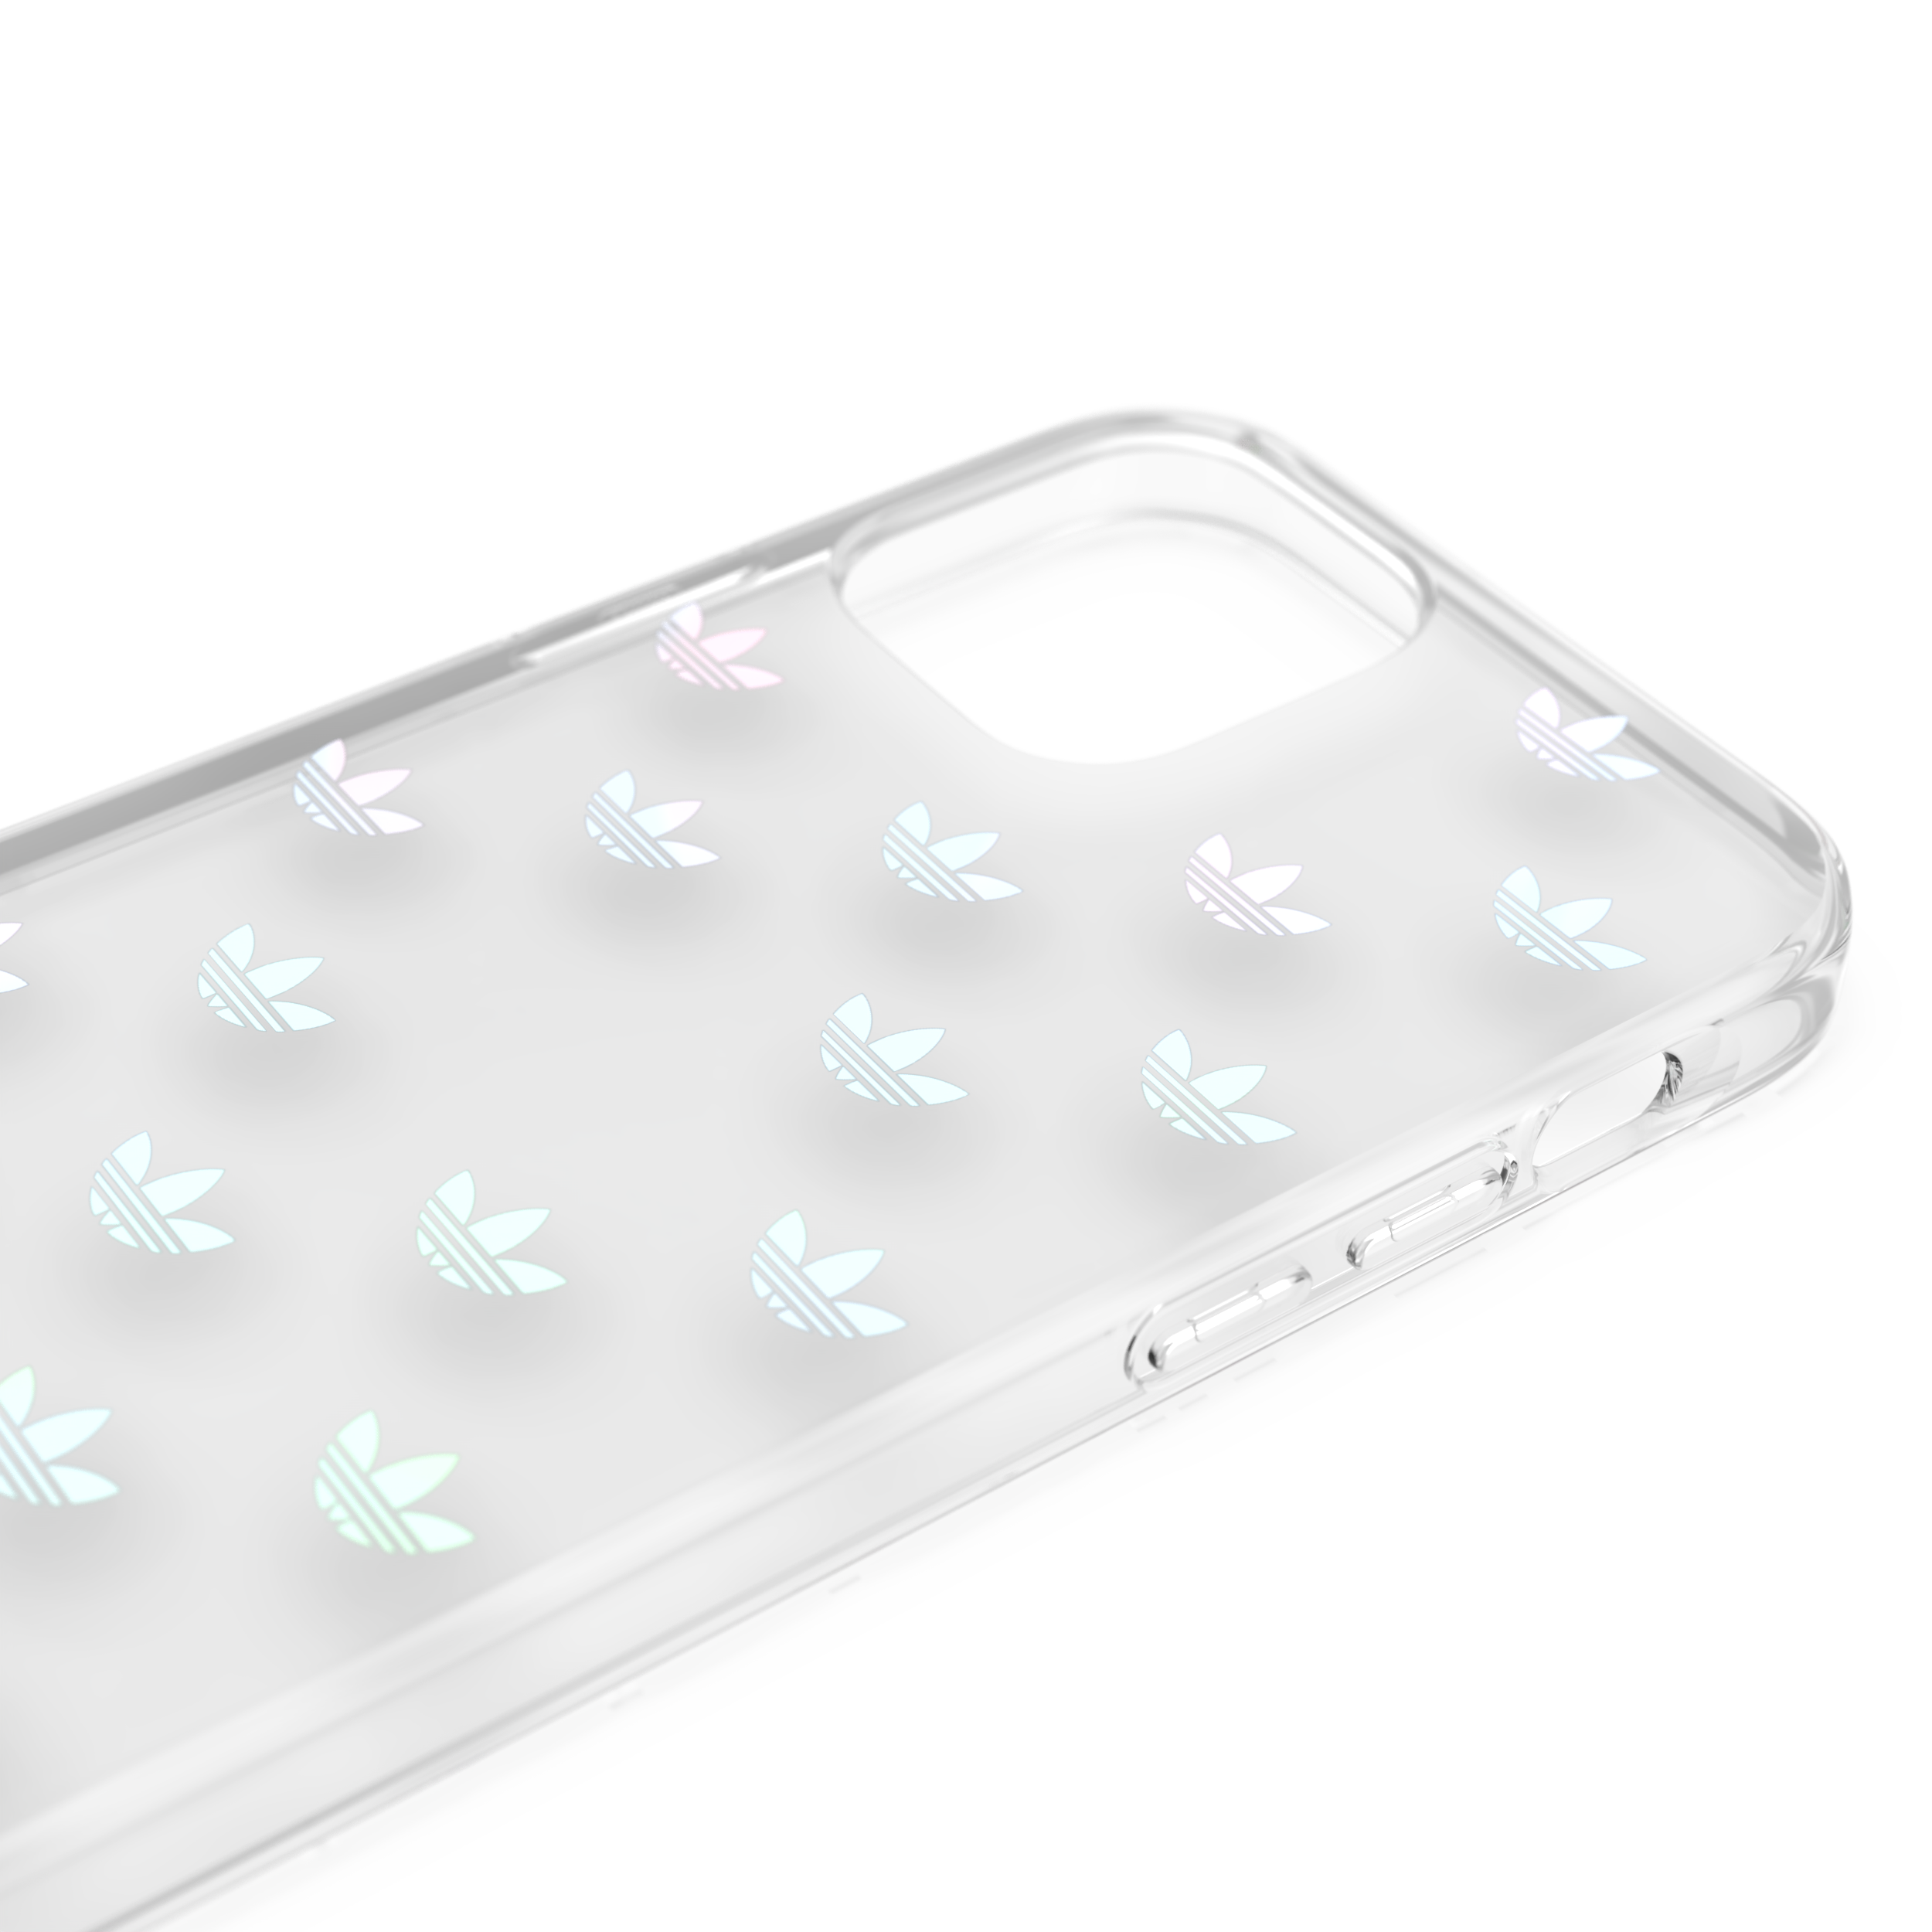 Adidas Originals Snap Phone Case For iPhone 12/12 Pro - Holographic/Clear